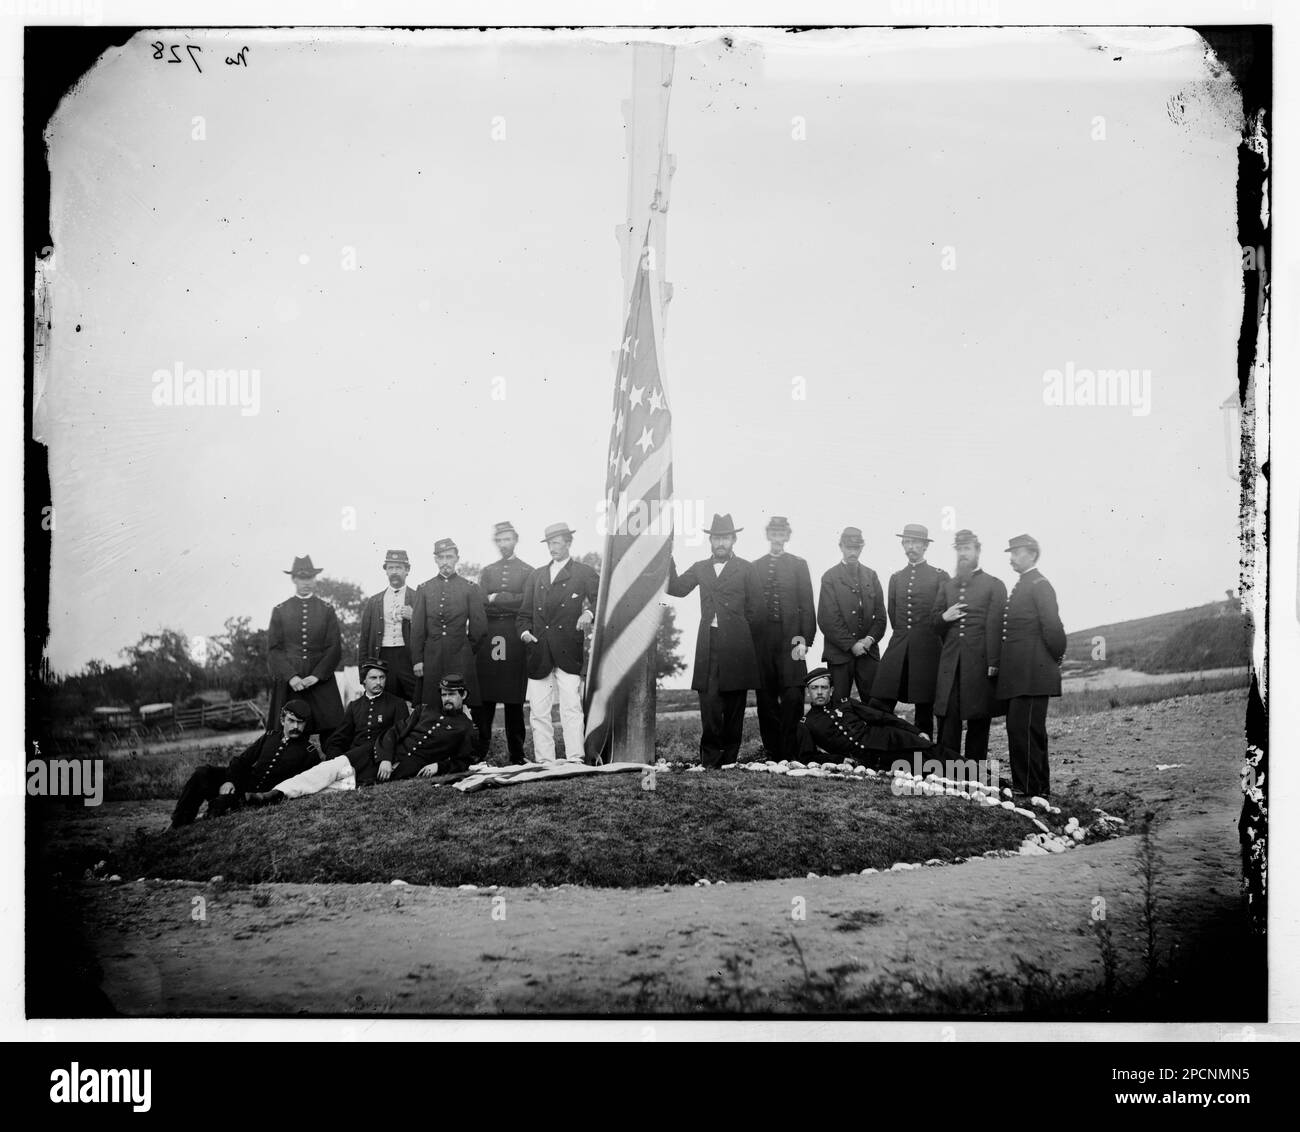 Washington, District of Columbia. Group of Signal Corps officers in camp near Georgetown. Civil war photographs, 1861-1865 . United States, History, Civil War, 1861-1865. Stock Photo